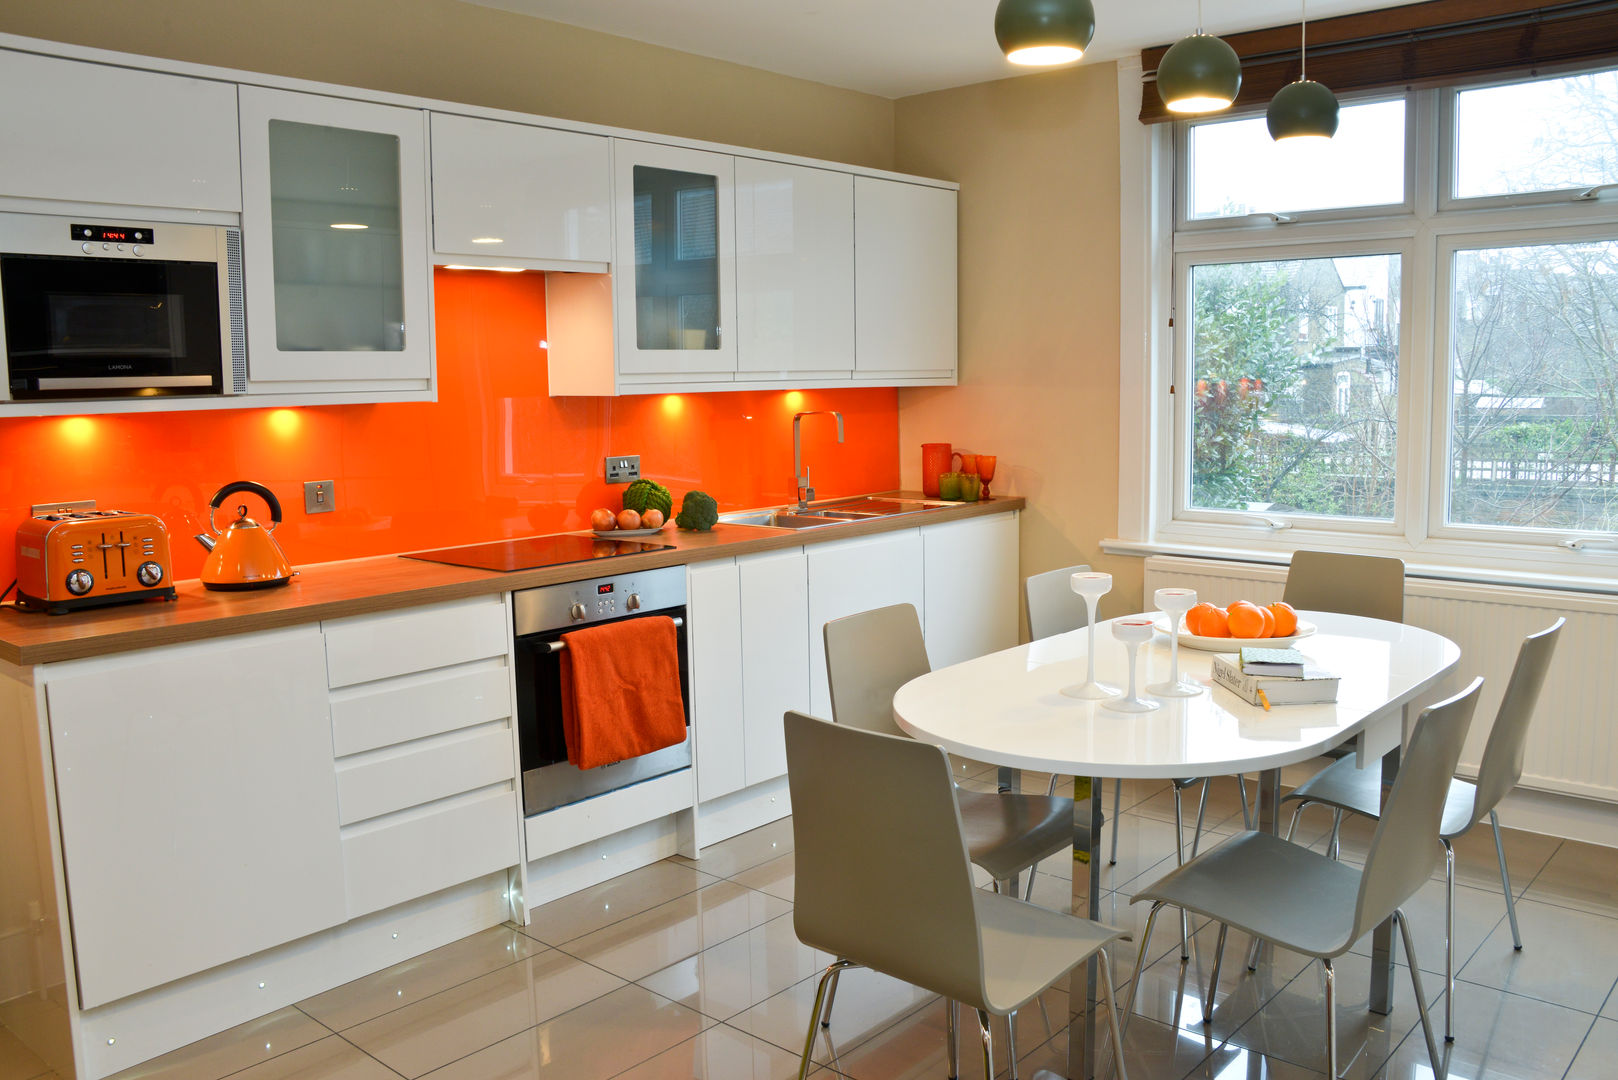 A Bright and Breezy Kitchen, Cathy Phillips & Co Cathy Phillips & Co Modern kitchen